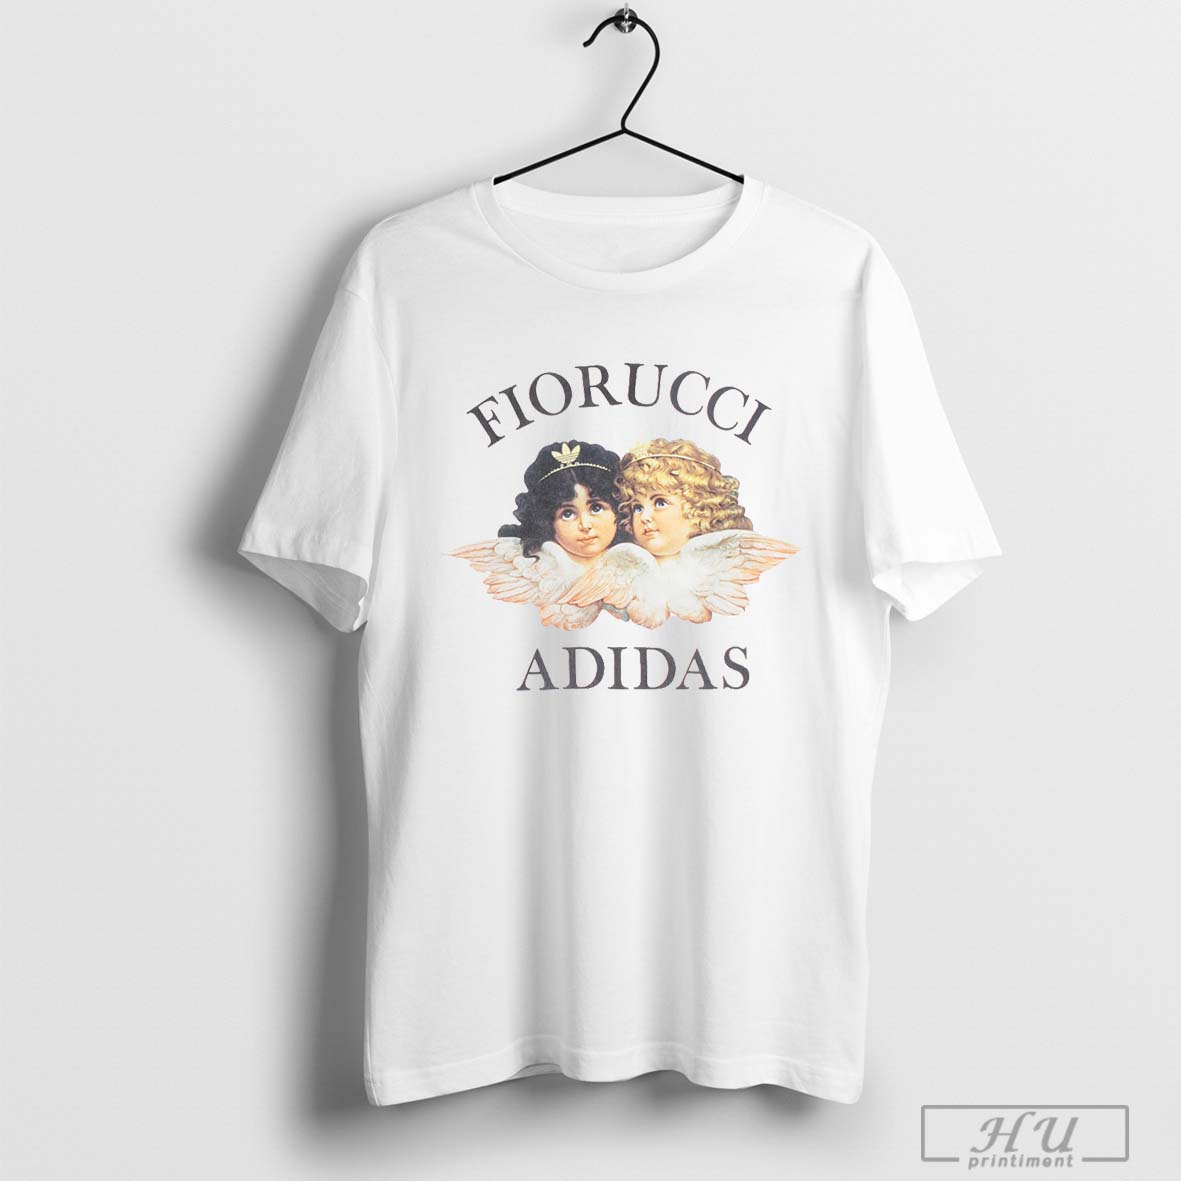 Billy Wiens lading Fiorucci T-Shirts, Featuring the Iconic Fiorucci Angels and Graphic Logos  Shirt - Printiment